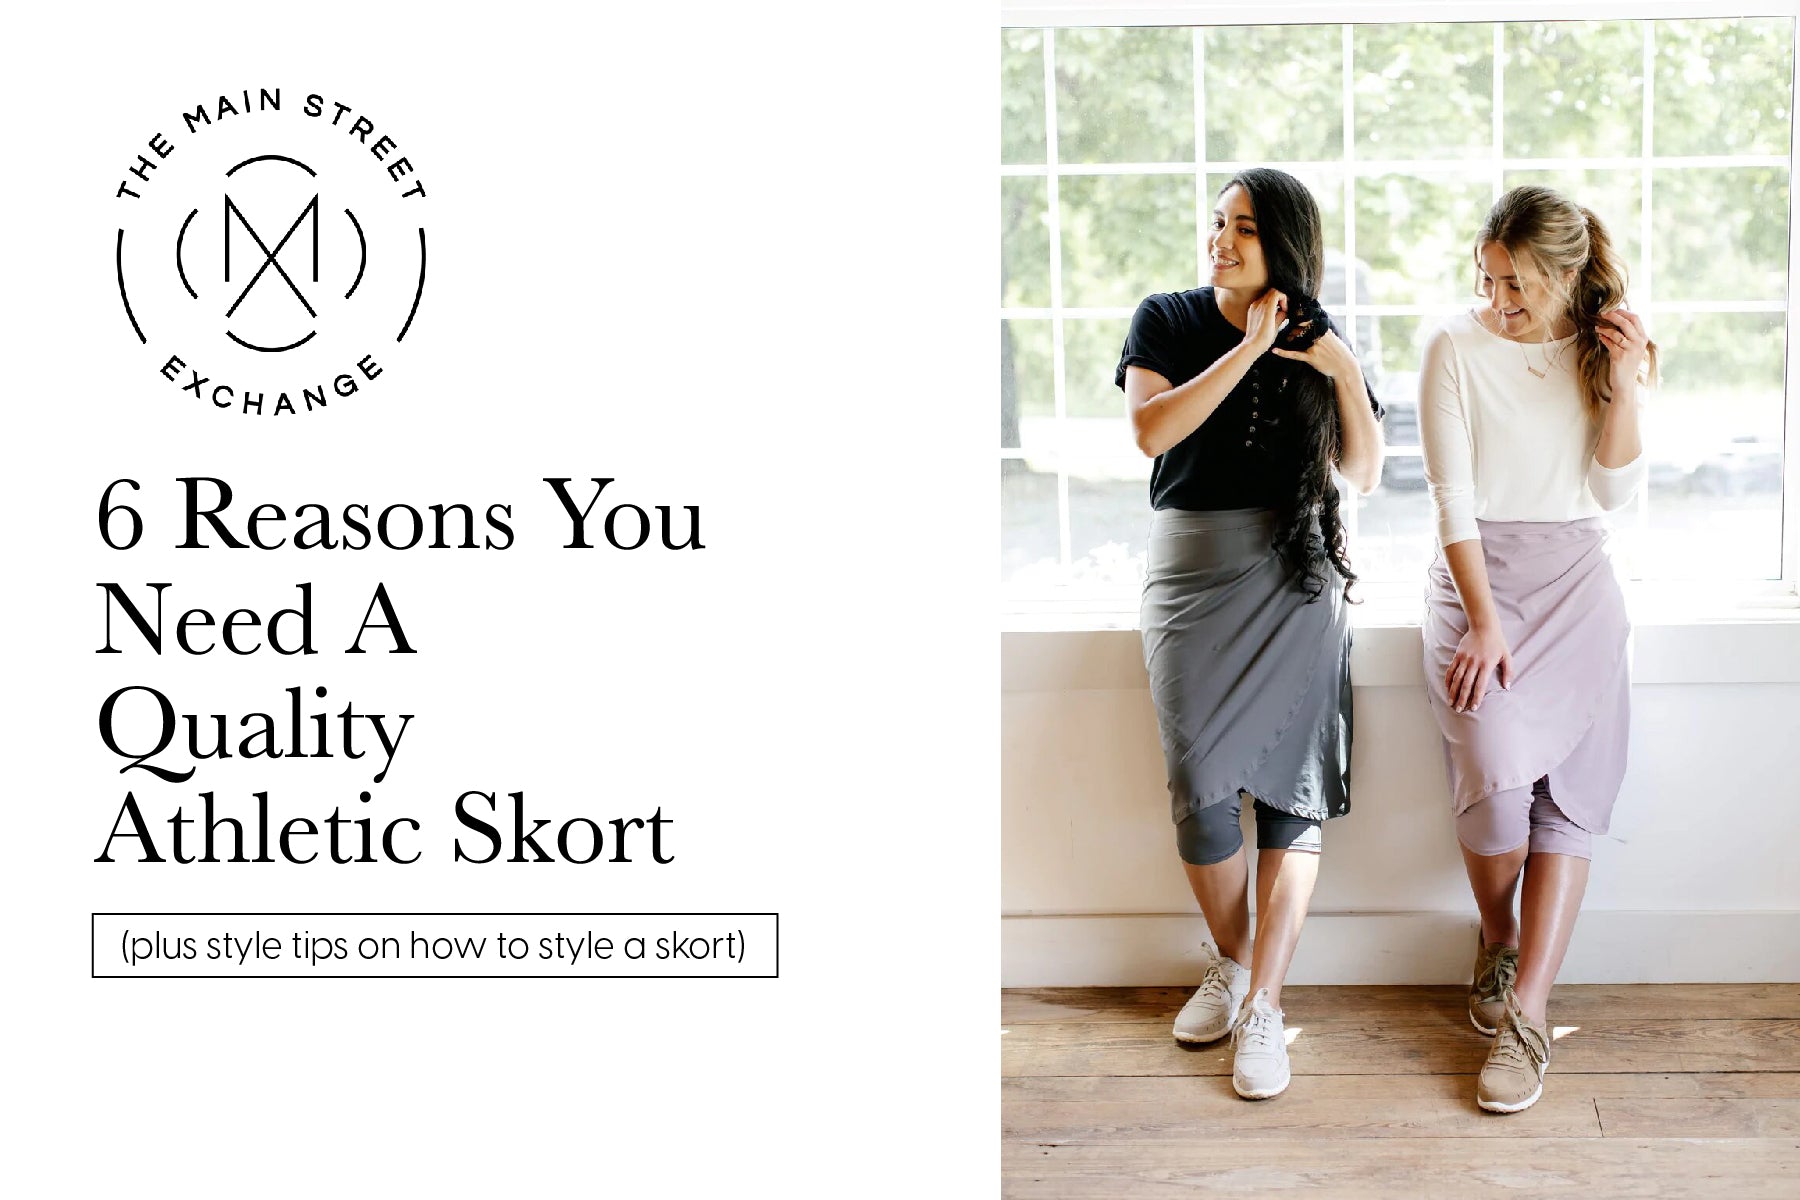 6 Reasons You Need A Quality Athletic Skort (plus style tips on